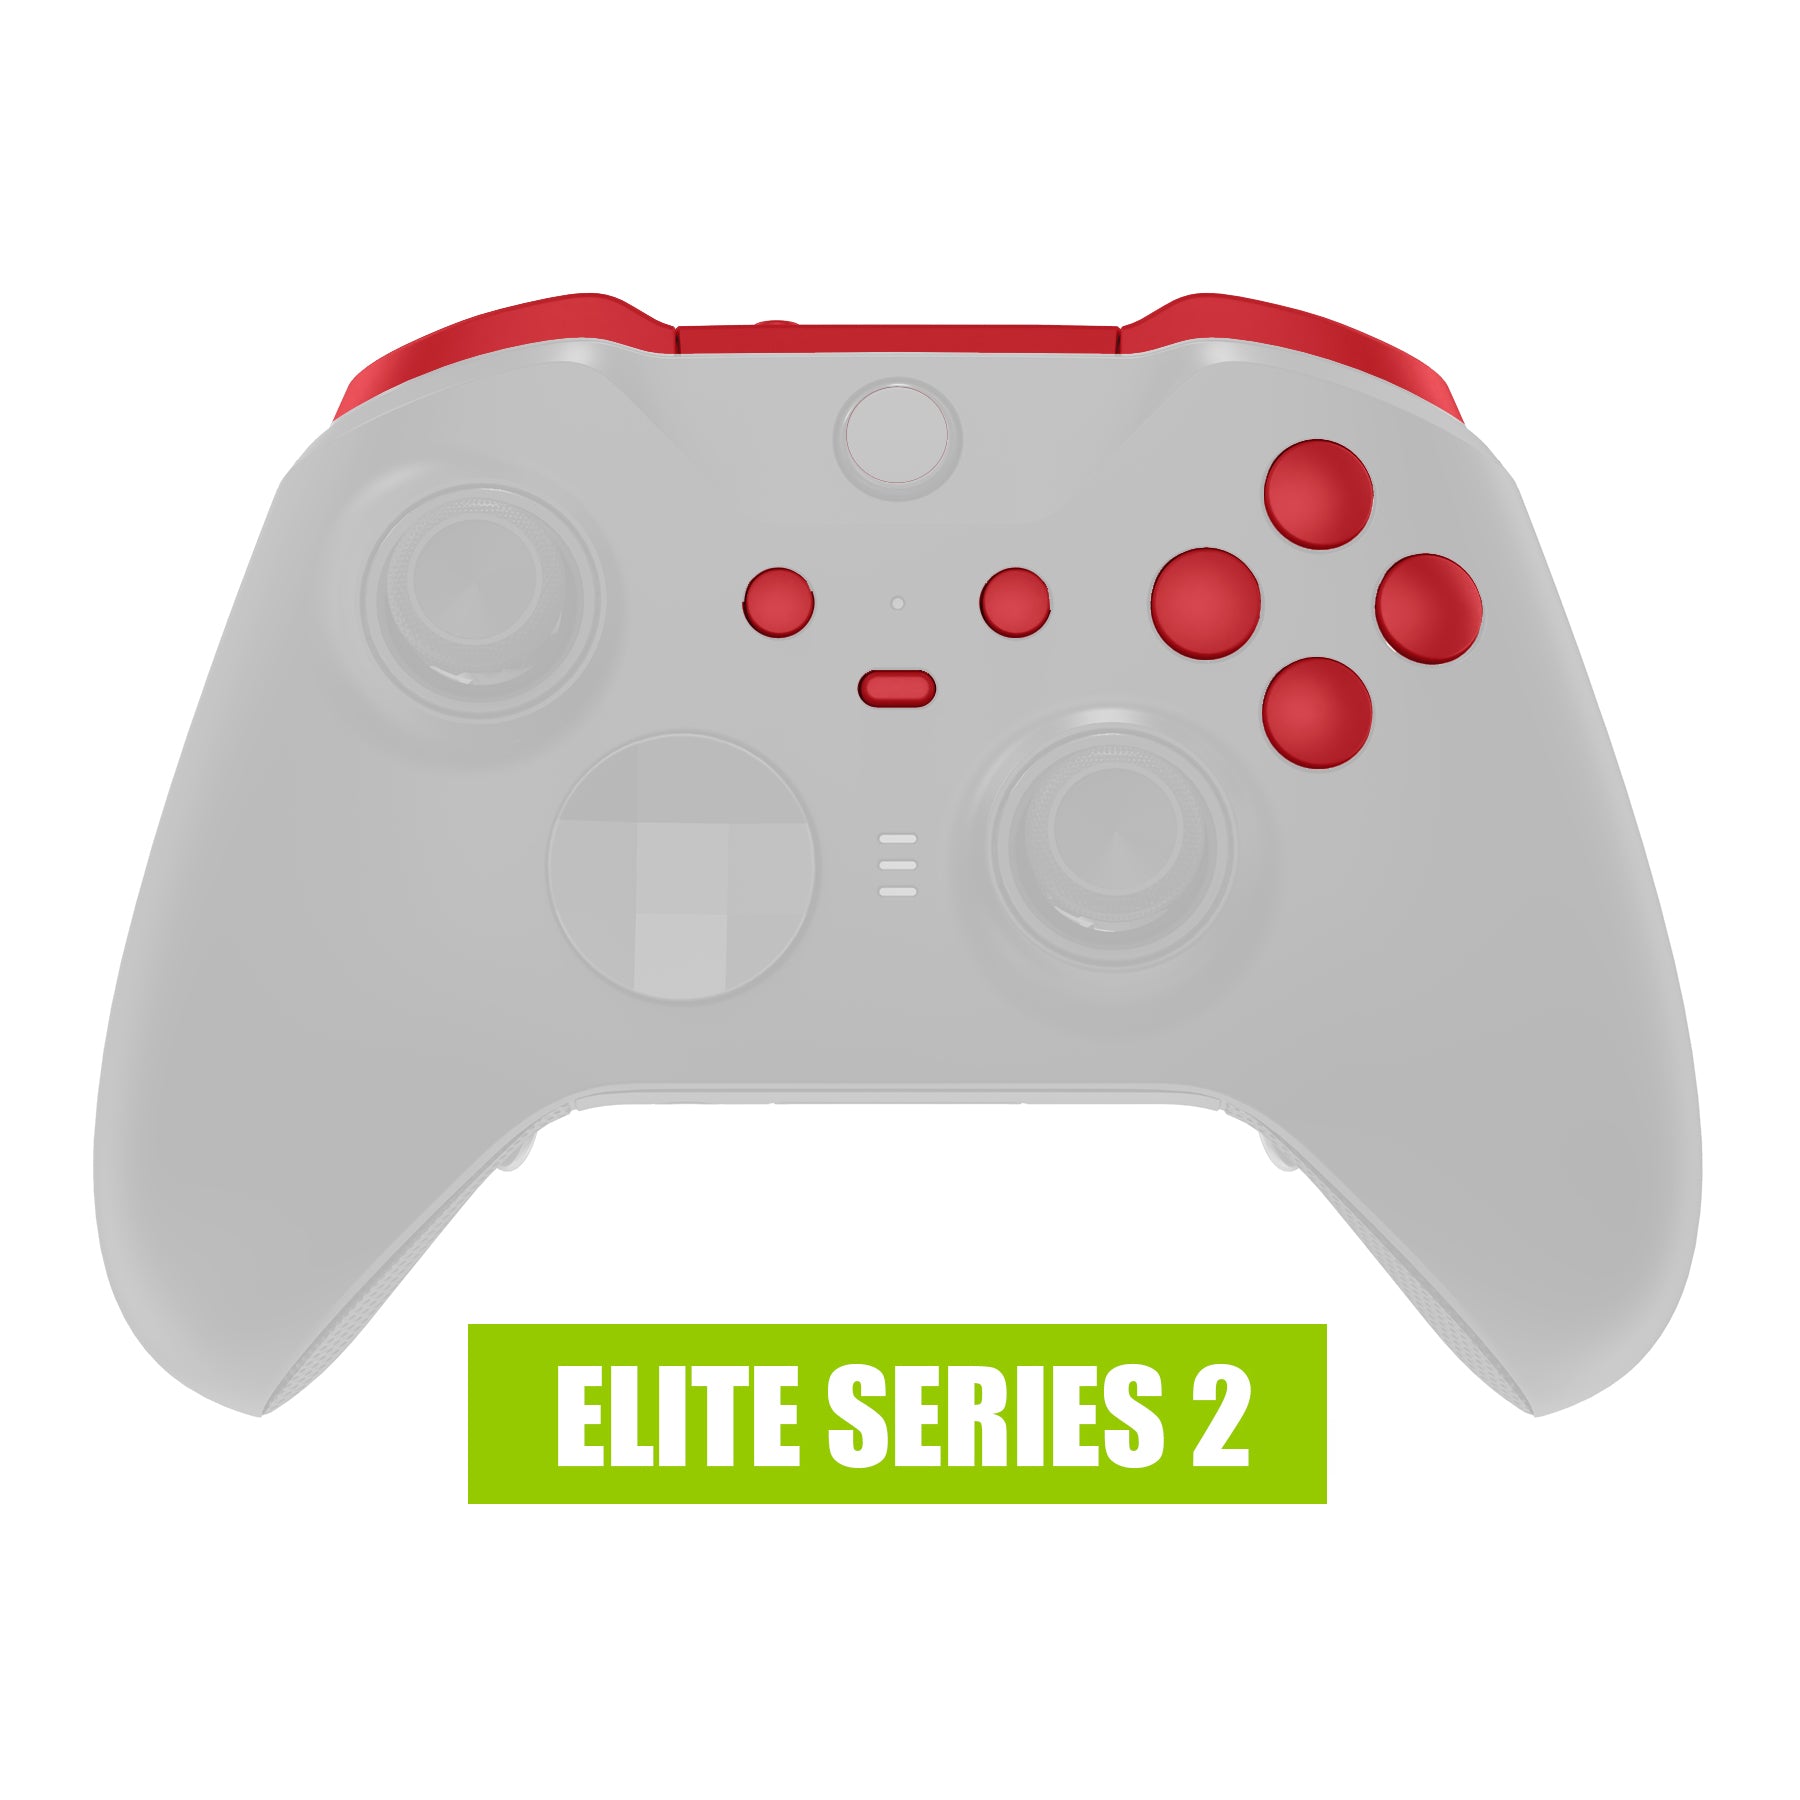 eXtremeRate Retail Passion Red Replacement Buttons for Xbox One Elite Series 2 Controller, LB RB LT RT Bumpers Triggers ABXY Start Back Sync Profile Switch Keys for Xbox One Elite V2 Controller (Model 1797 and Core Model 1797) - IL132